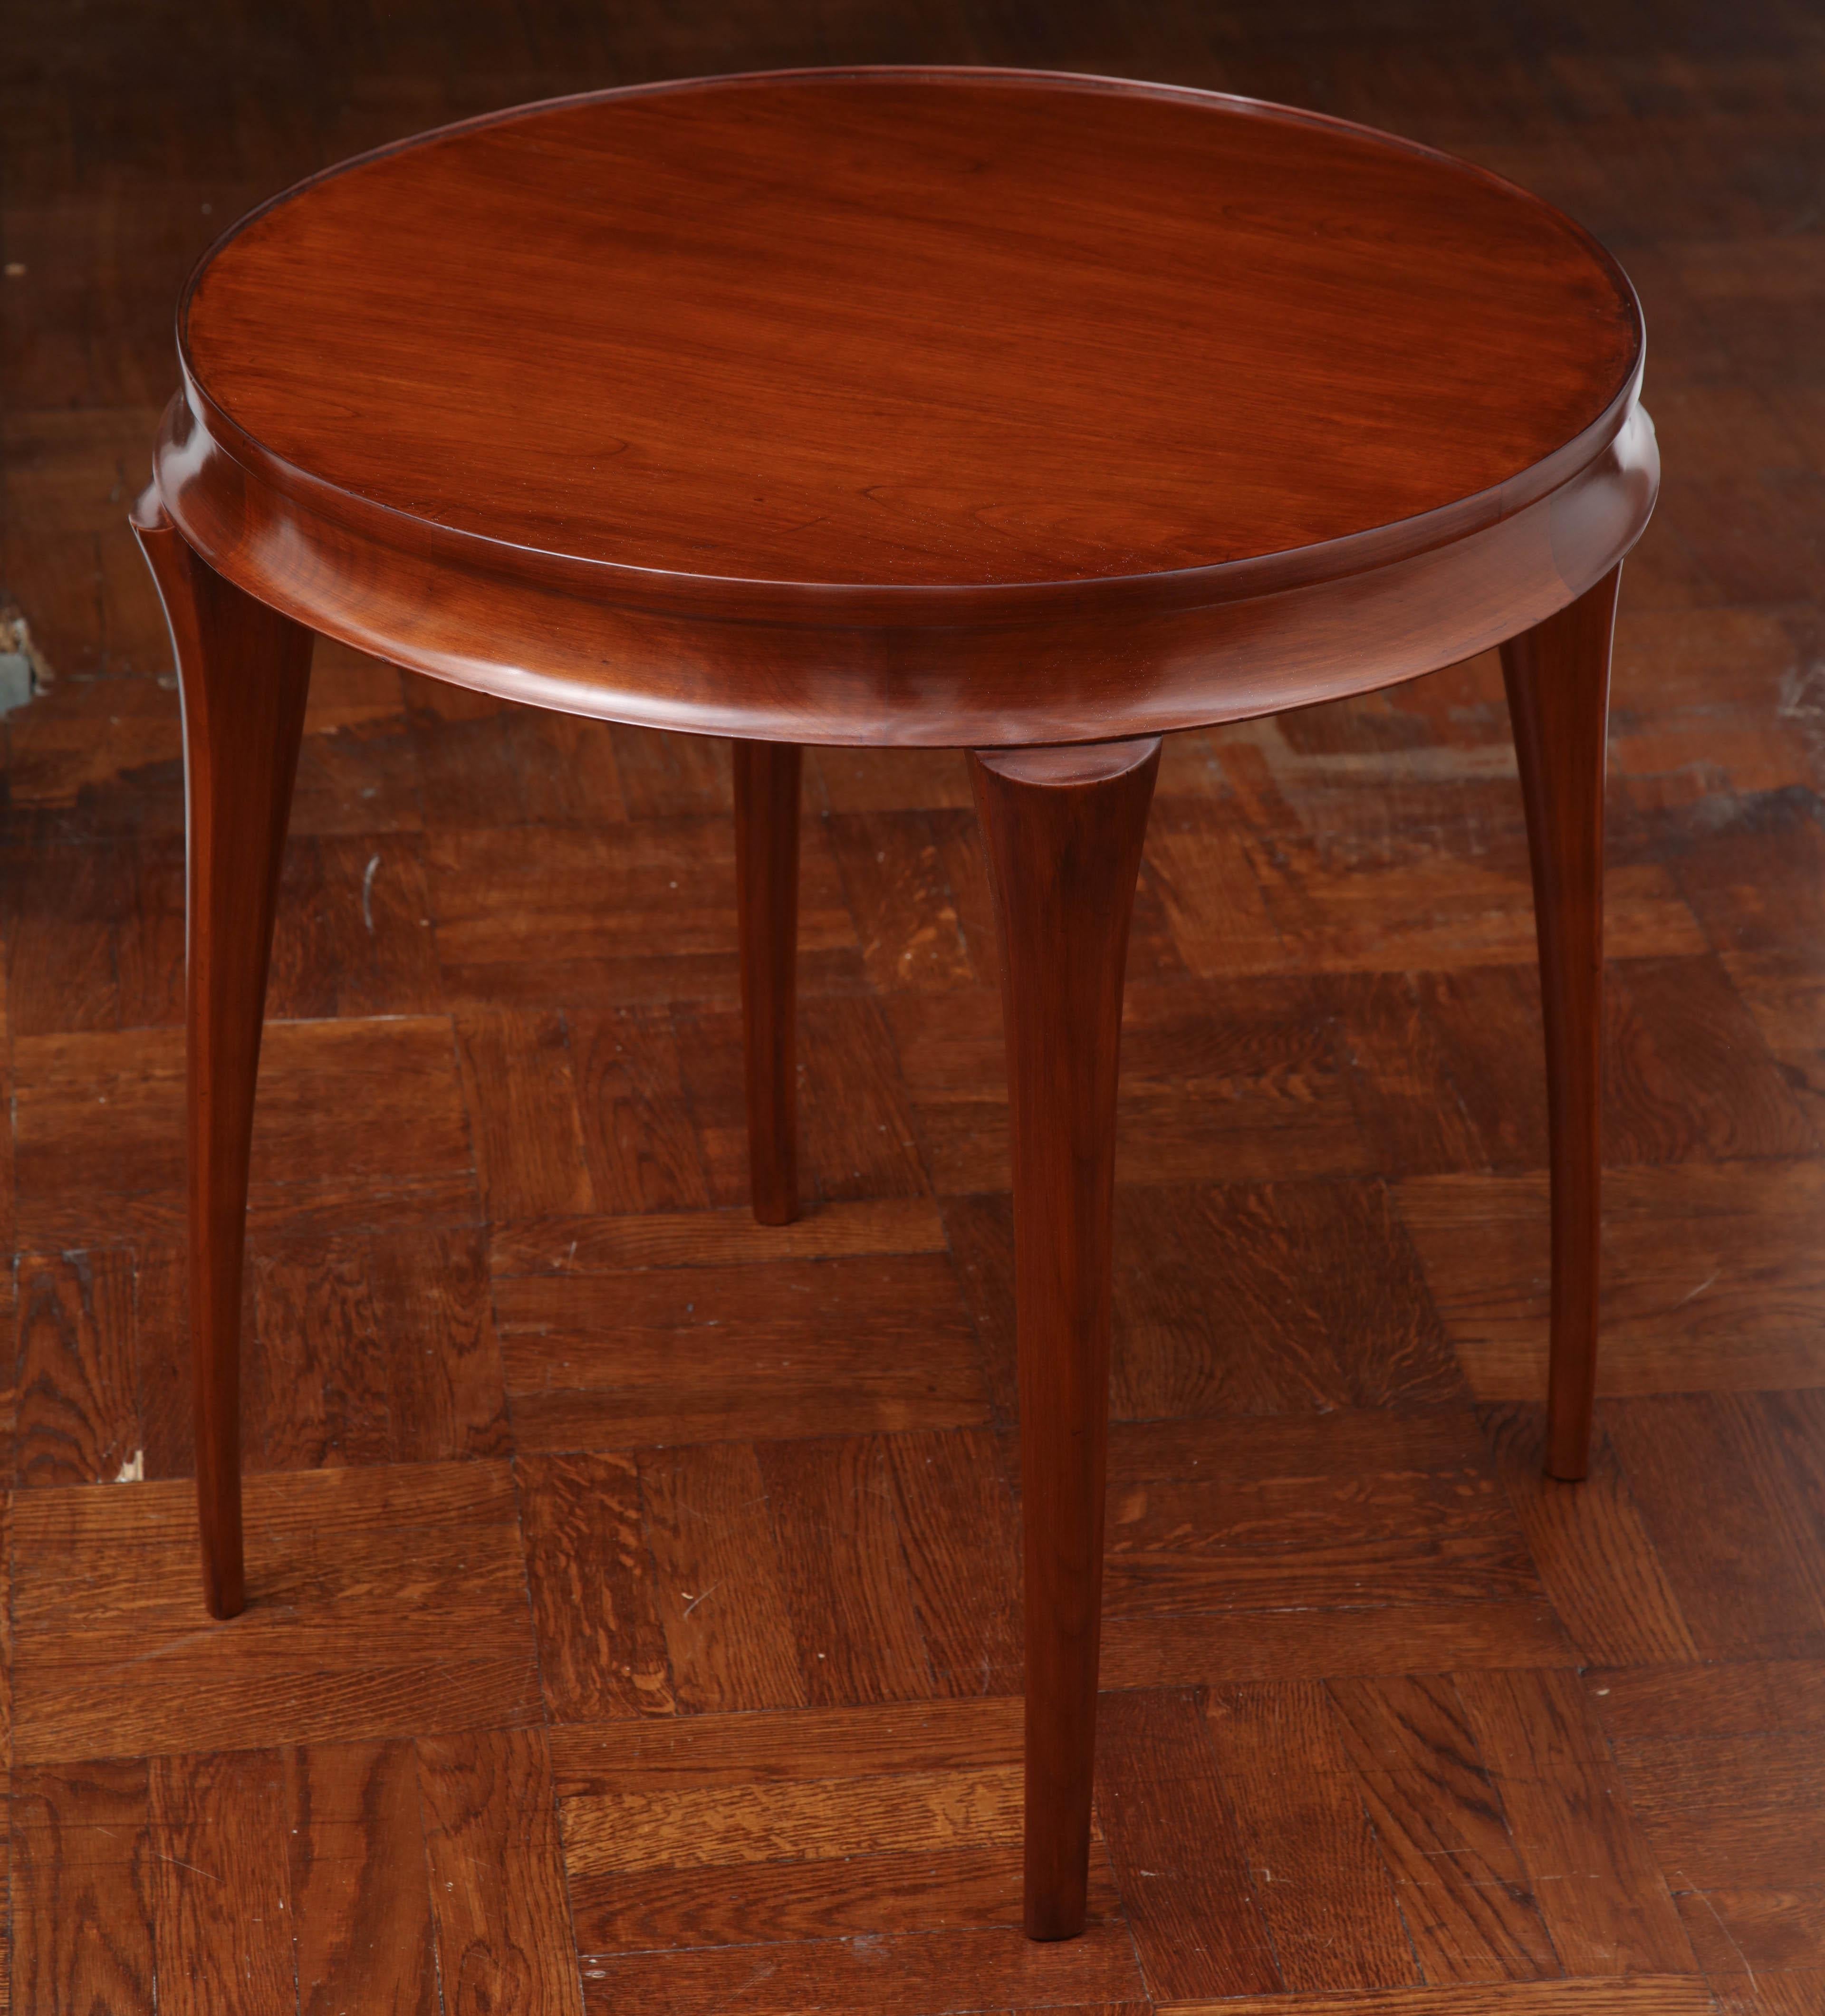 Round cherry table with tapered legs.